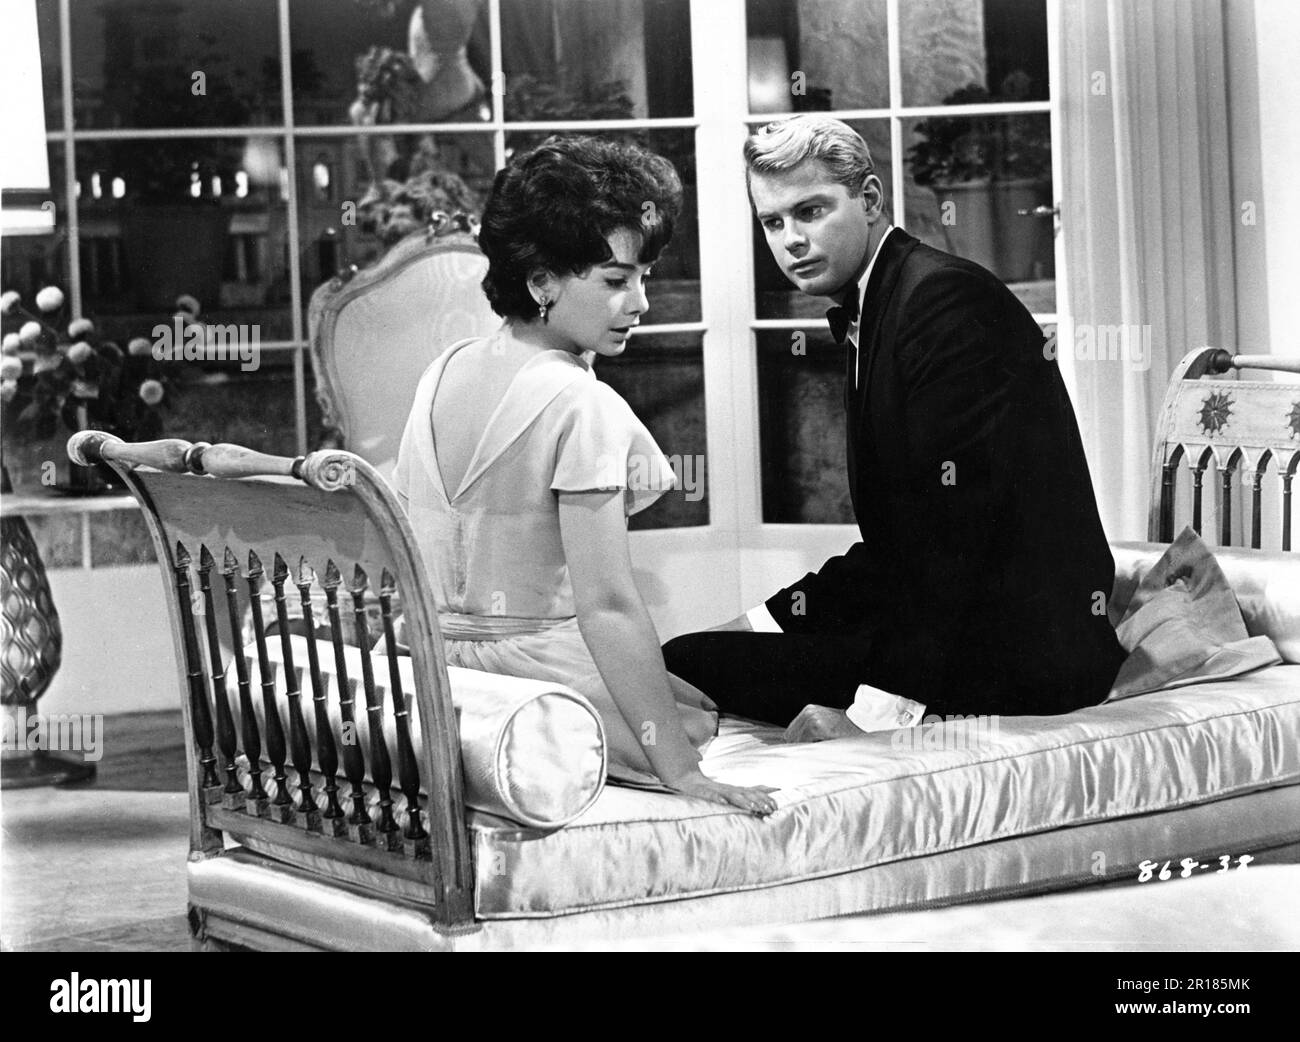 SUZANNE PLESHETTE and TROY DONAHUE in ROME ADVENTURE 1962 director / producer / screenplay DELMER DAVES novel Irving Fineman music Max Steiner costume design Howard Shoup Warner Bros. Stock Photo